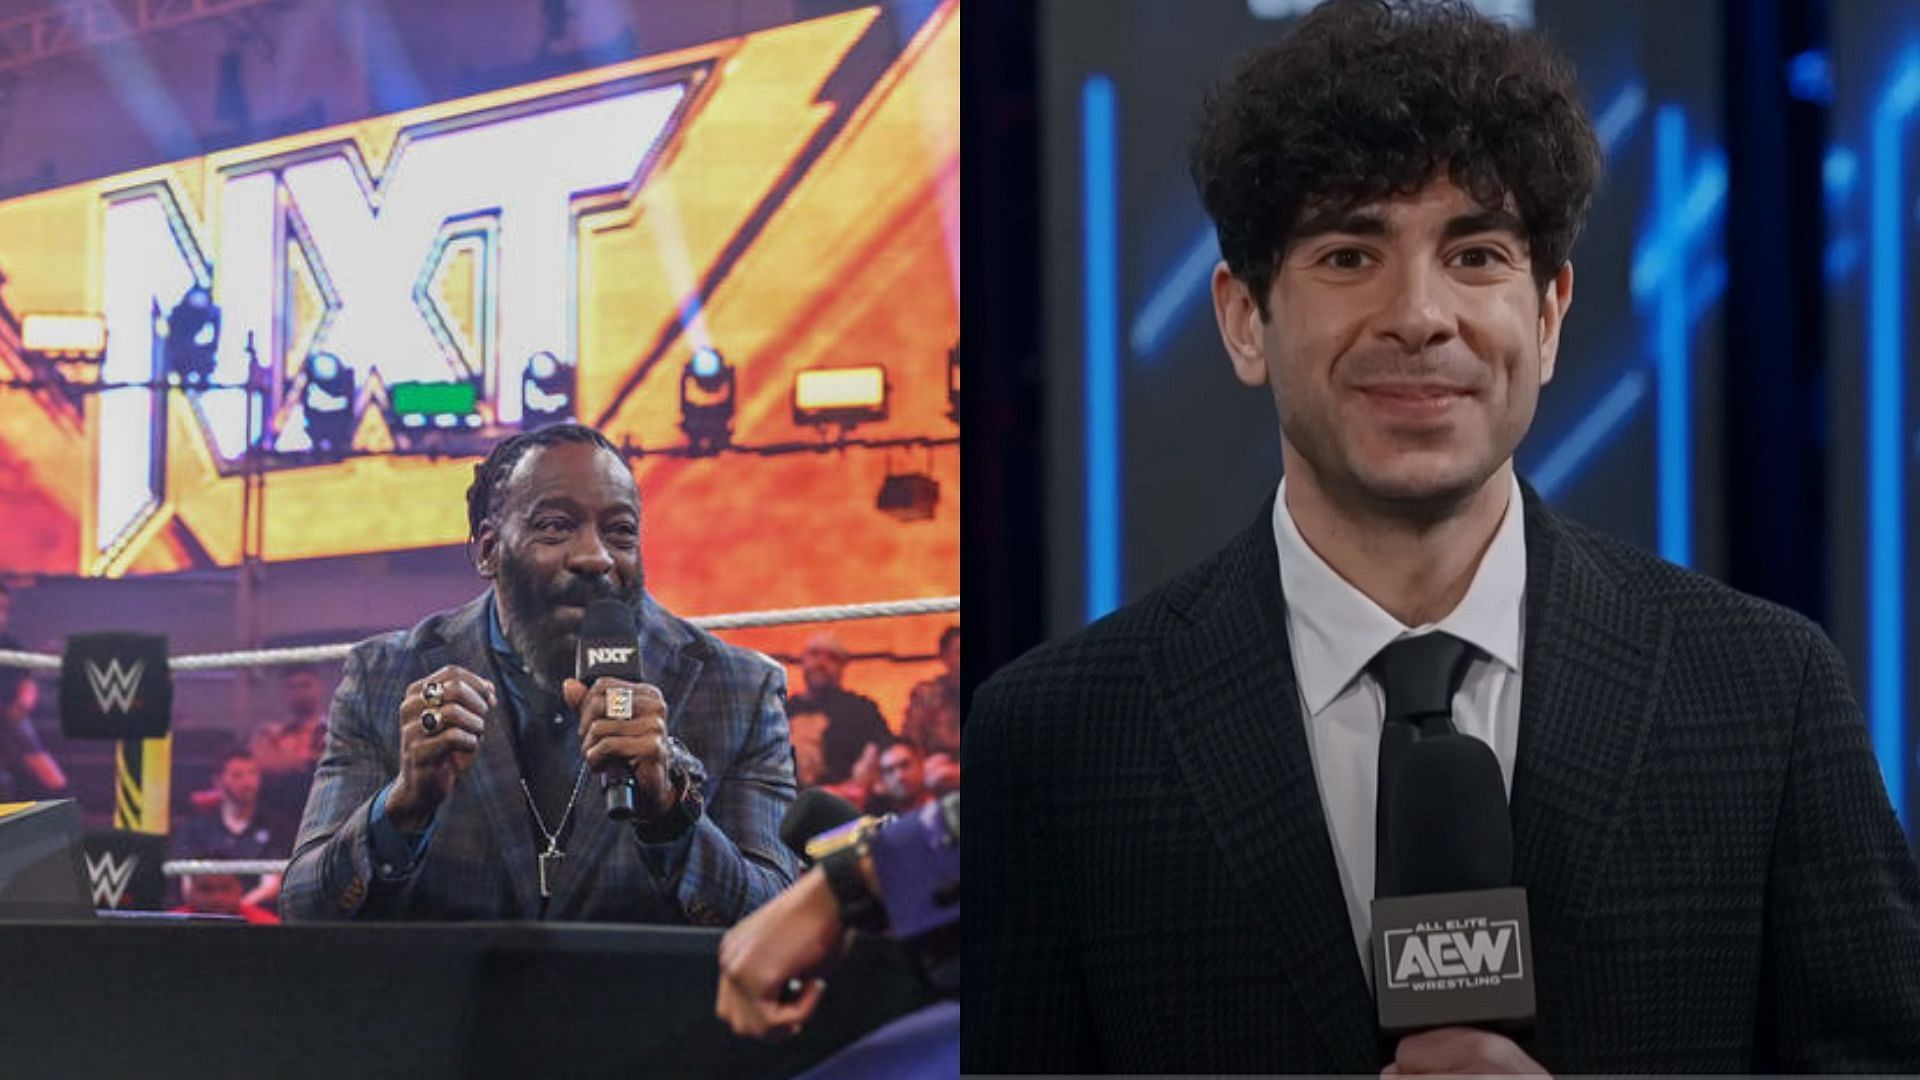 Booker T is a 2x WWE Hall of Famer and Tony Khan is the president of AEW [Photo courtesy of WWE Official Website, and AEW